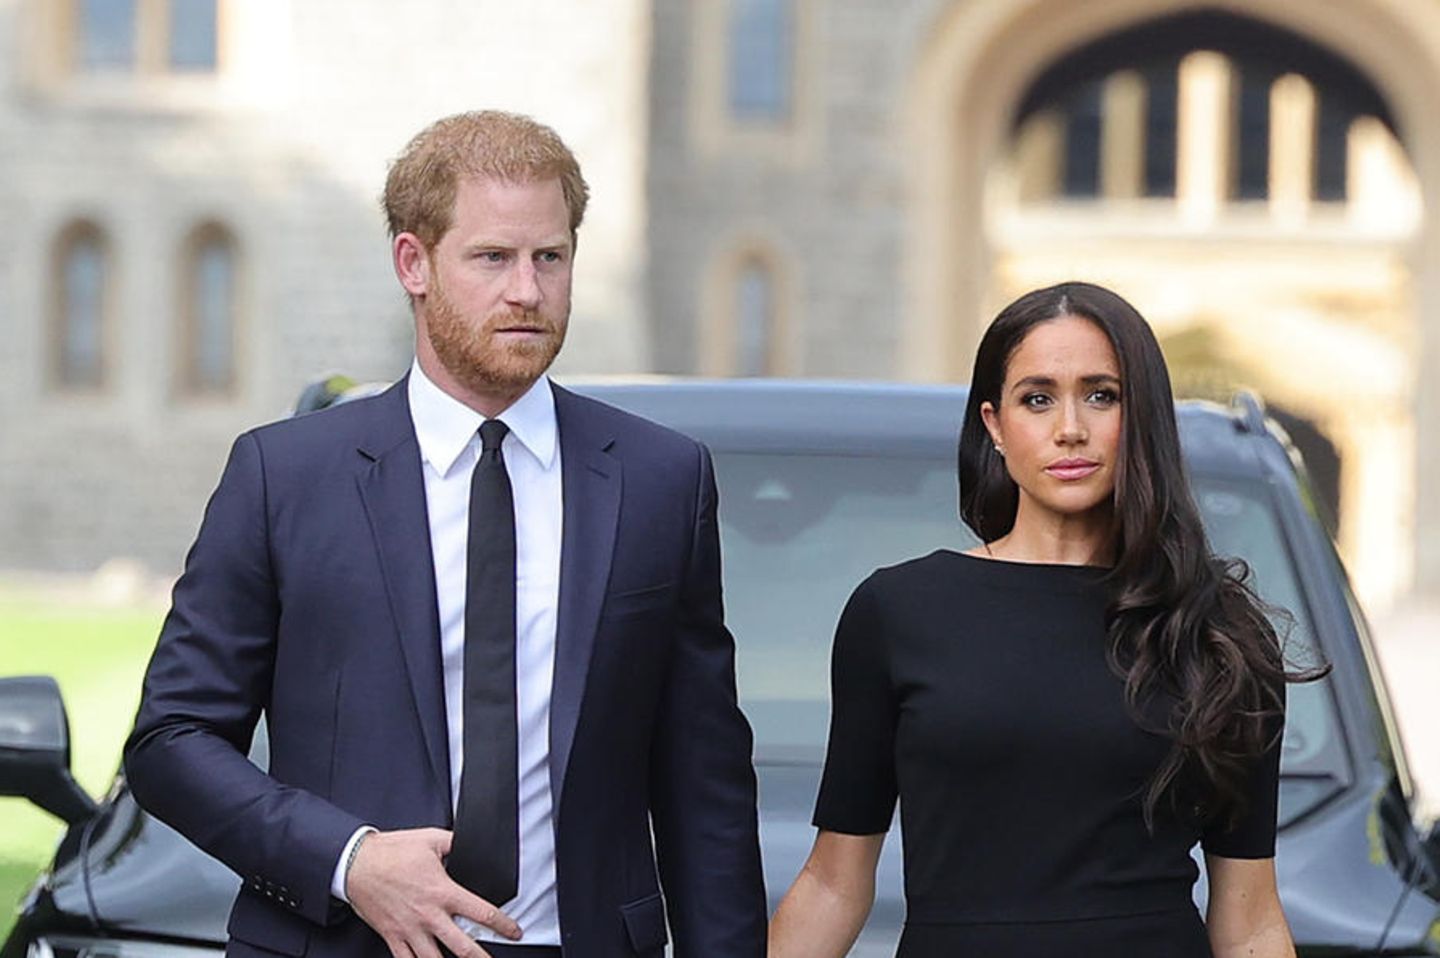 30 Hot Photos Of Meghan Markle That Would Make The Royals